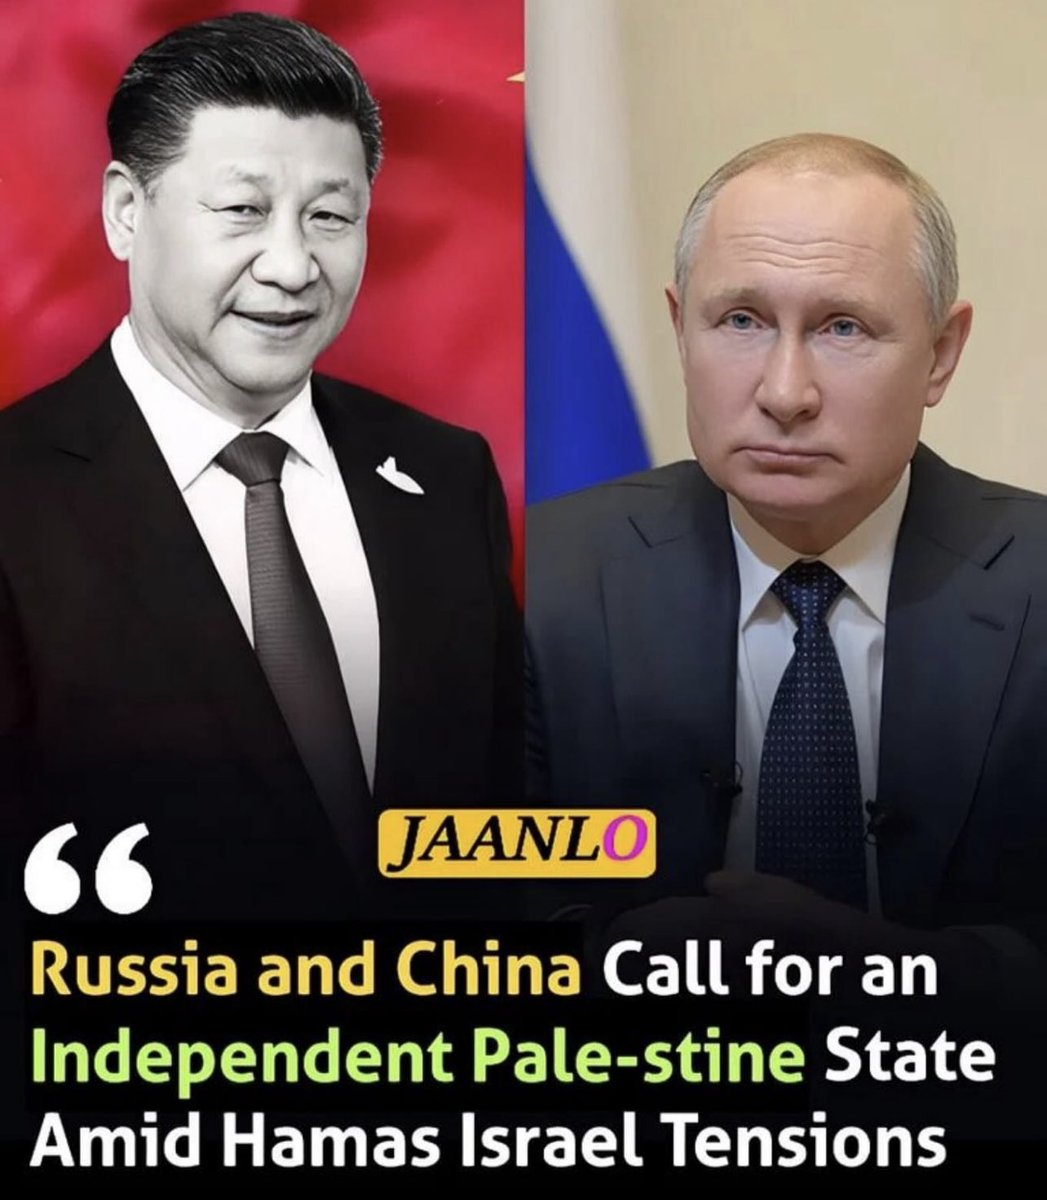 Russia and China side with Palestine 😦🇵🇸